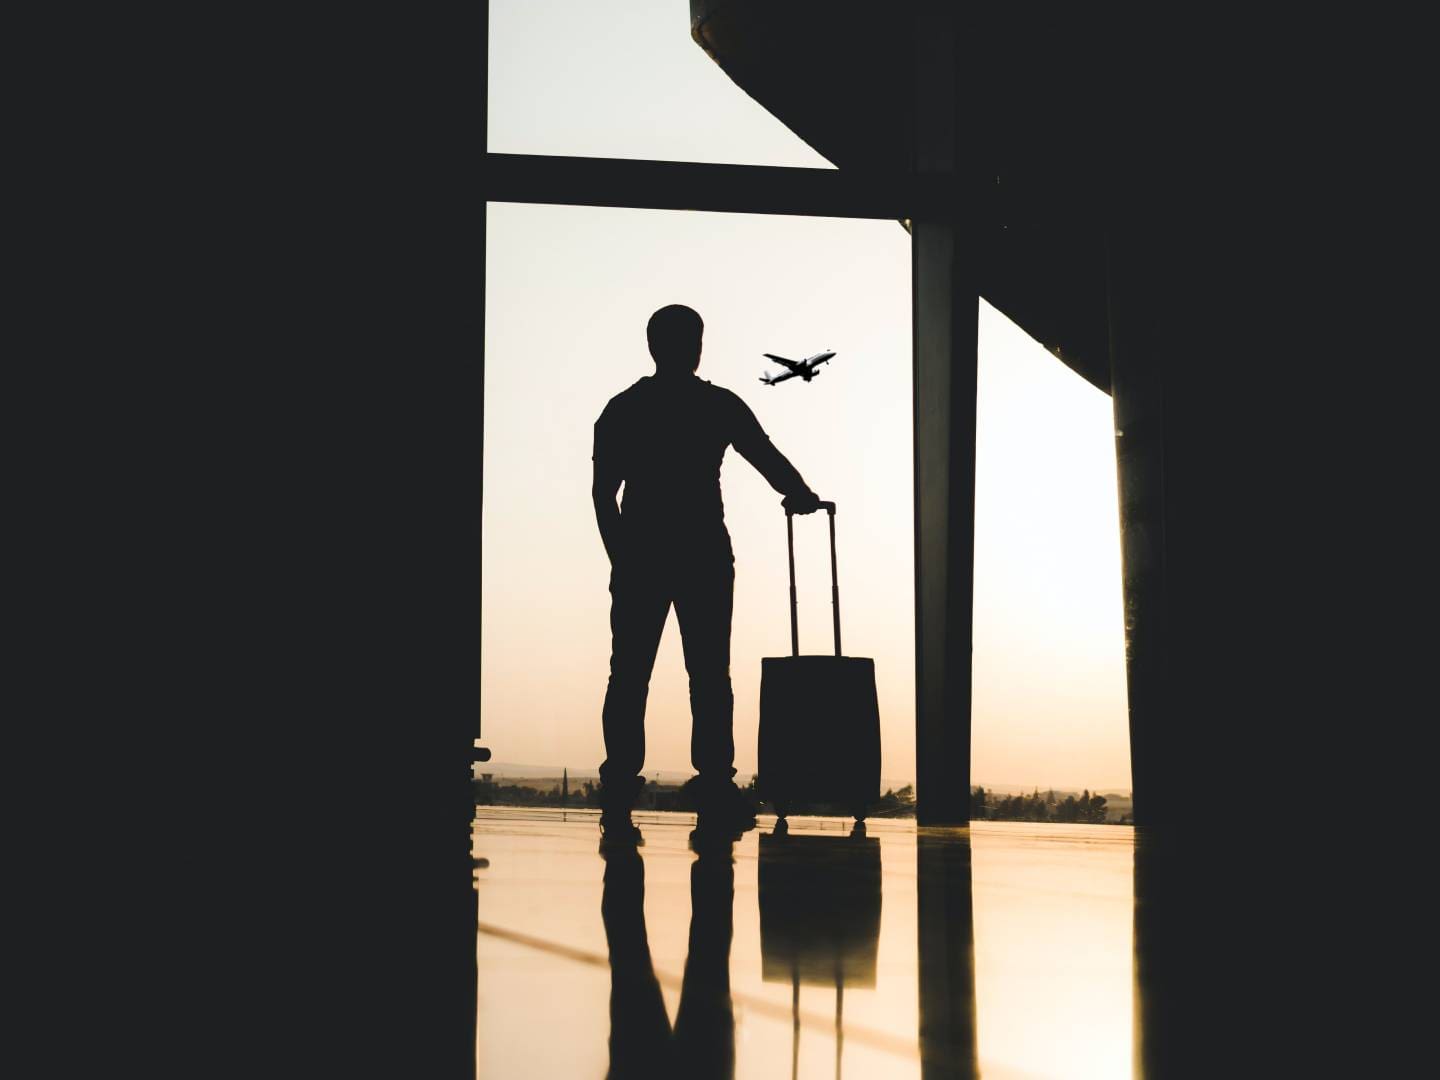 A man standing in front of an airport window with luggage.